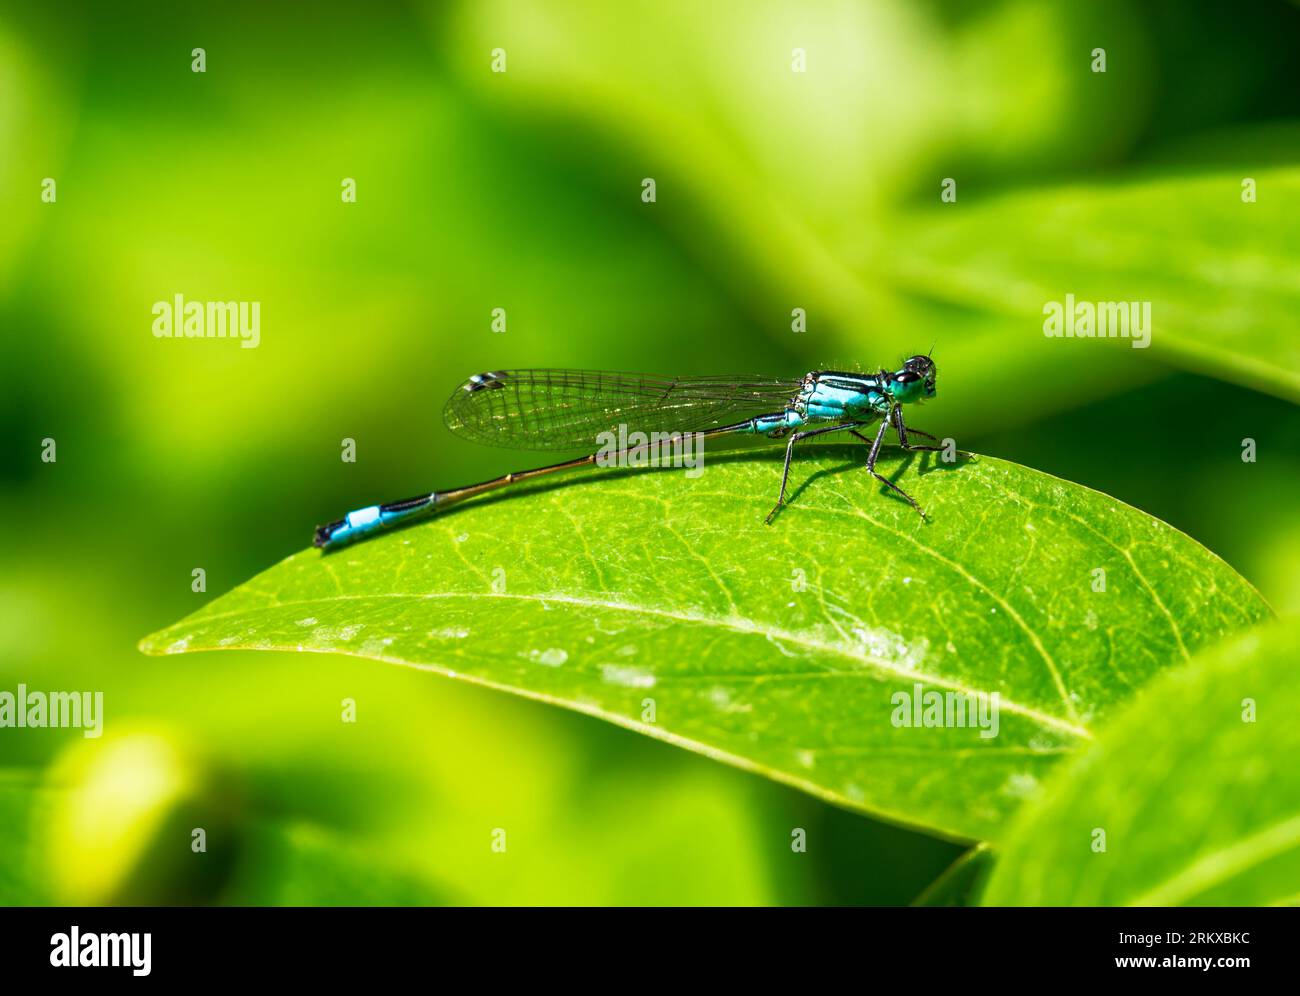 Macro of a bluetail damselfly on a green leaf Stock Photo